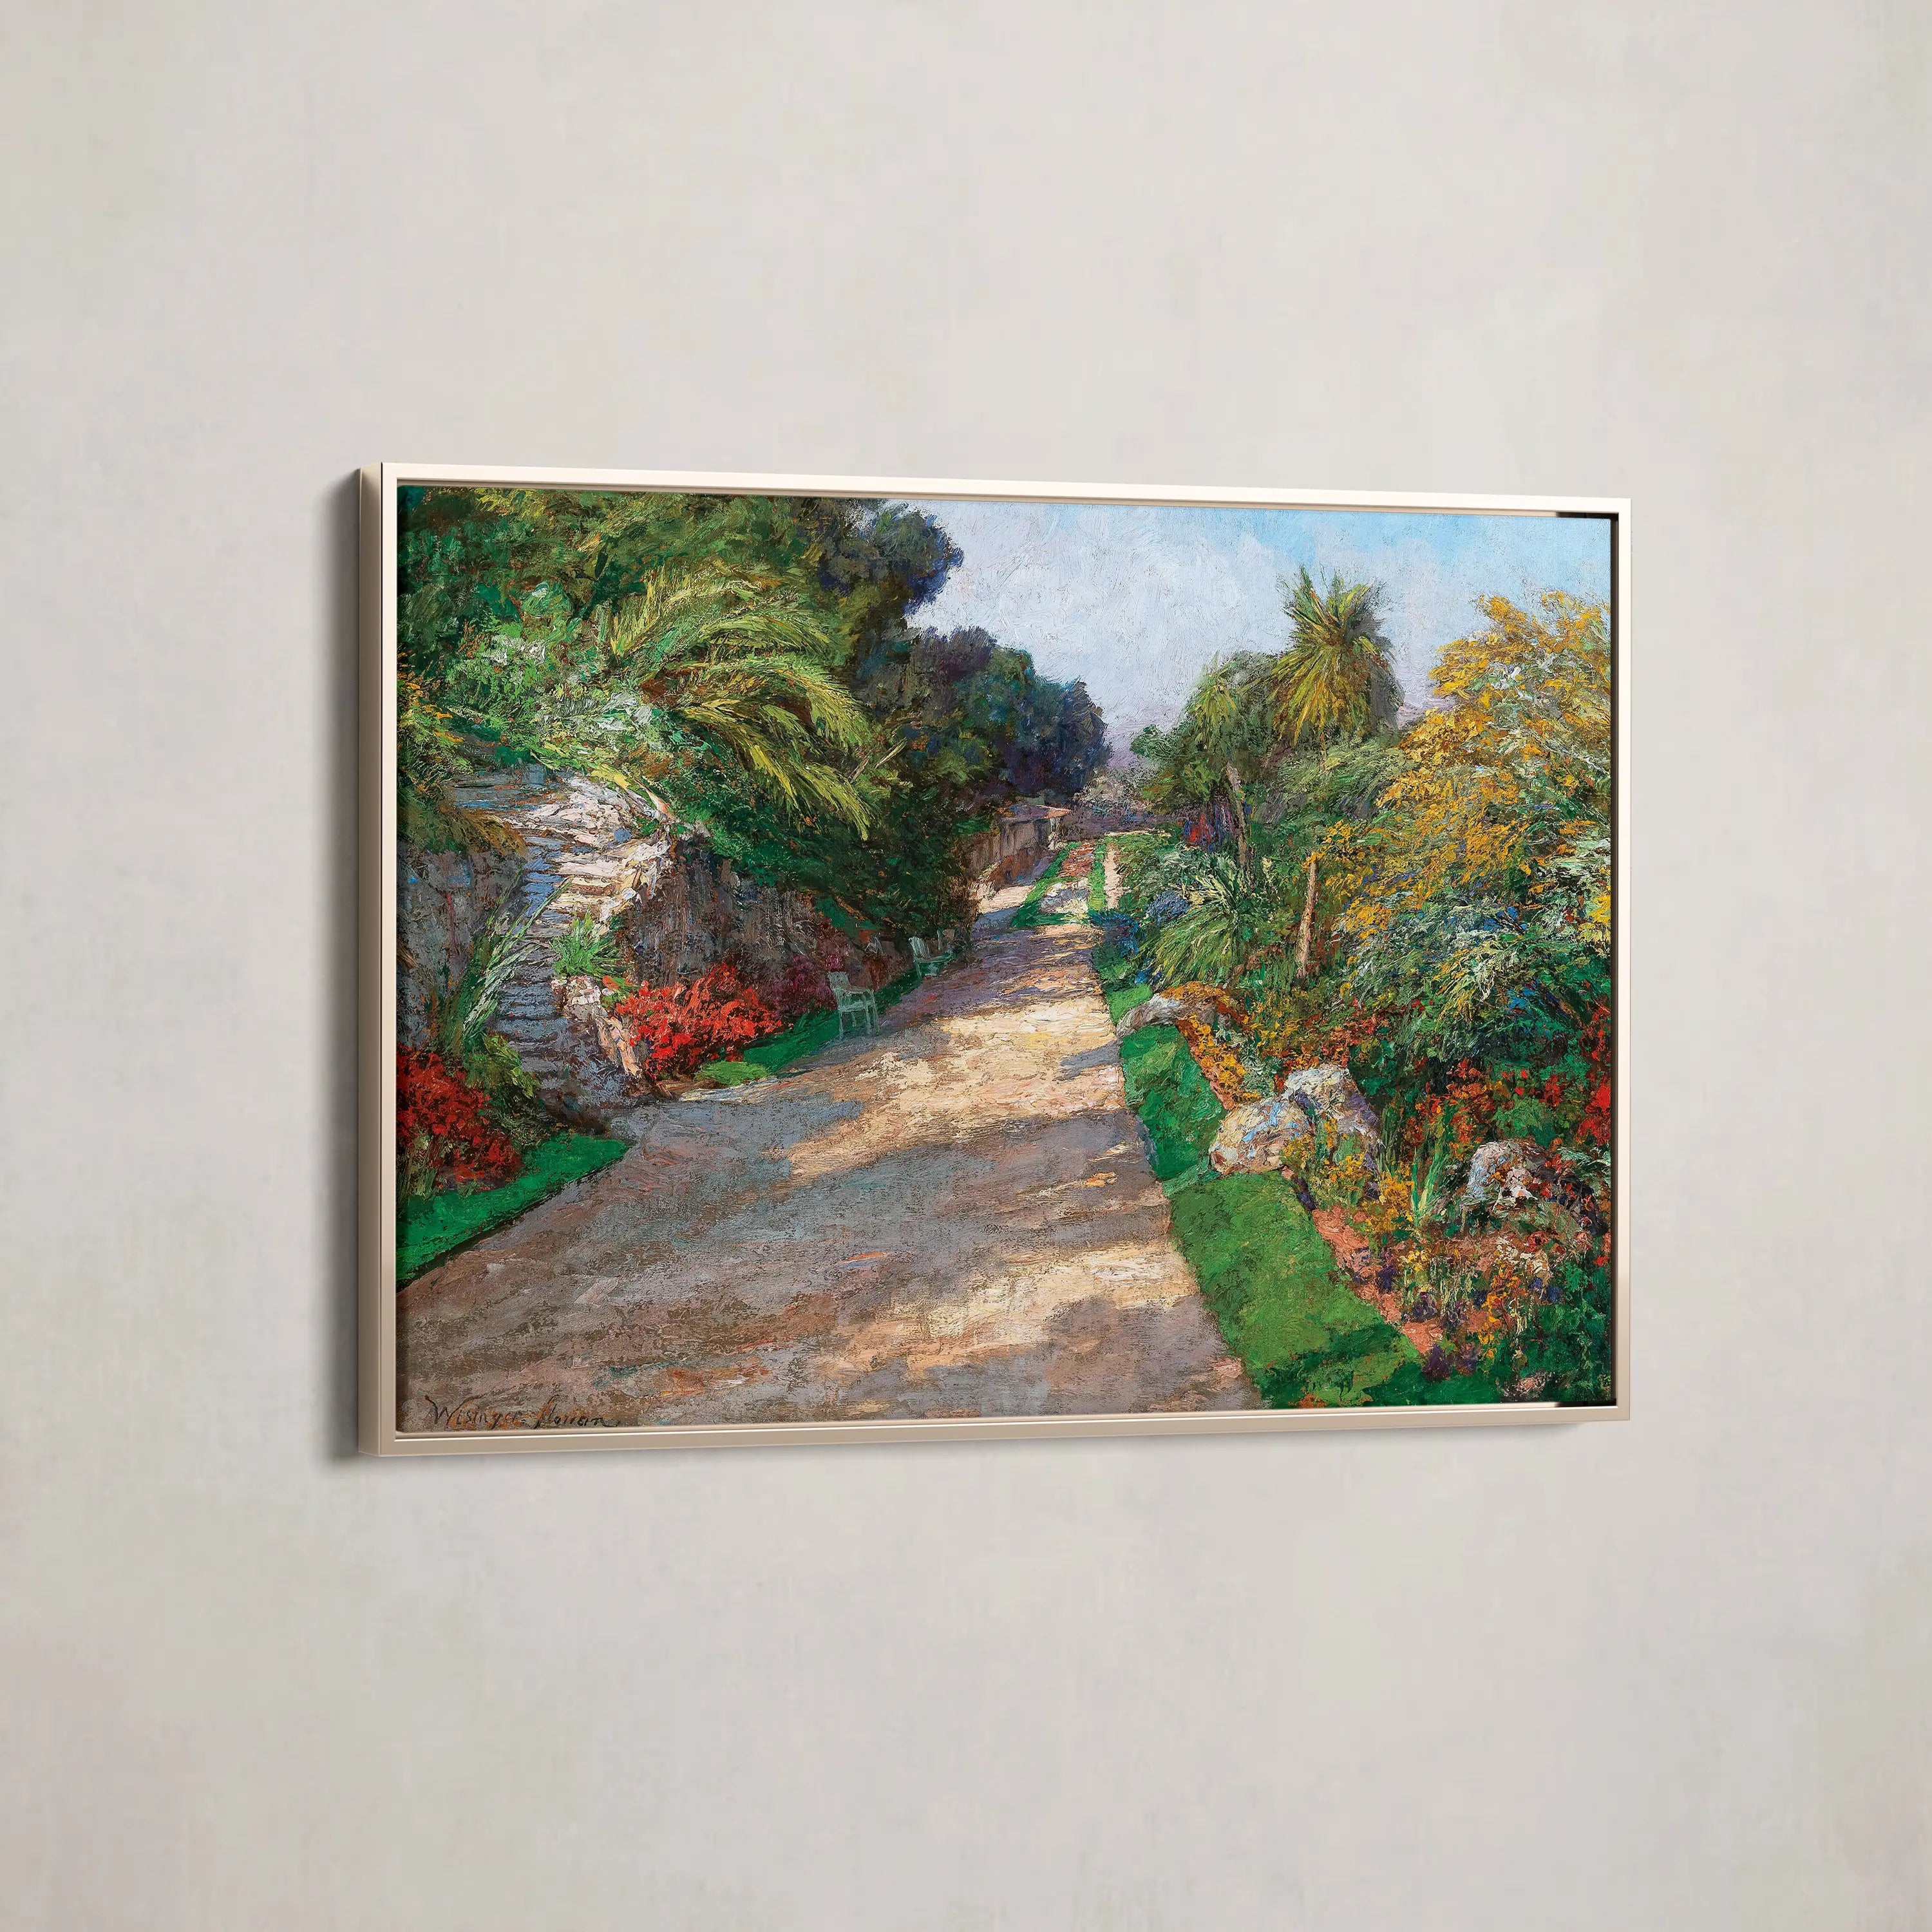 A Gardenpath Of The Riviera Palace Hotels Bei Monte Carlo (1906)